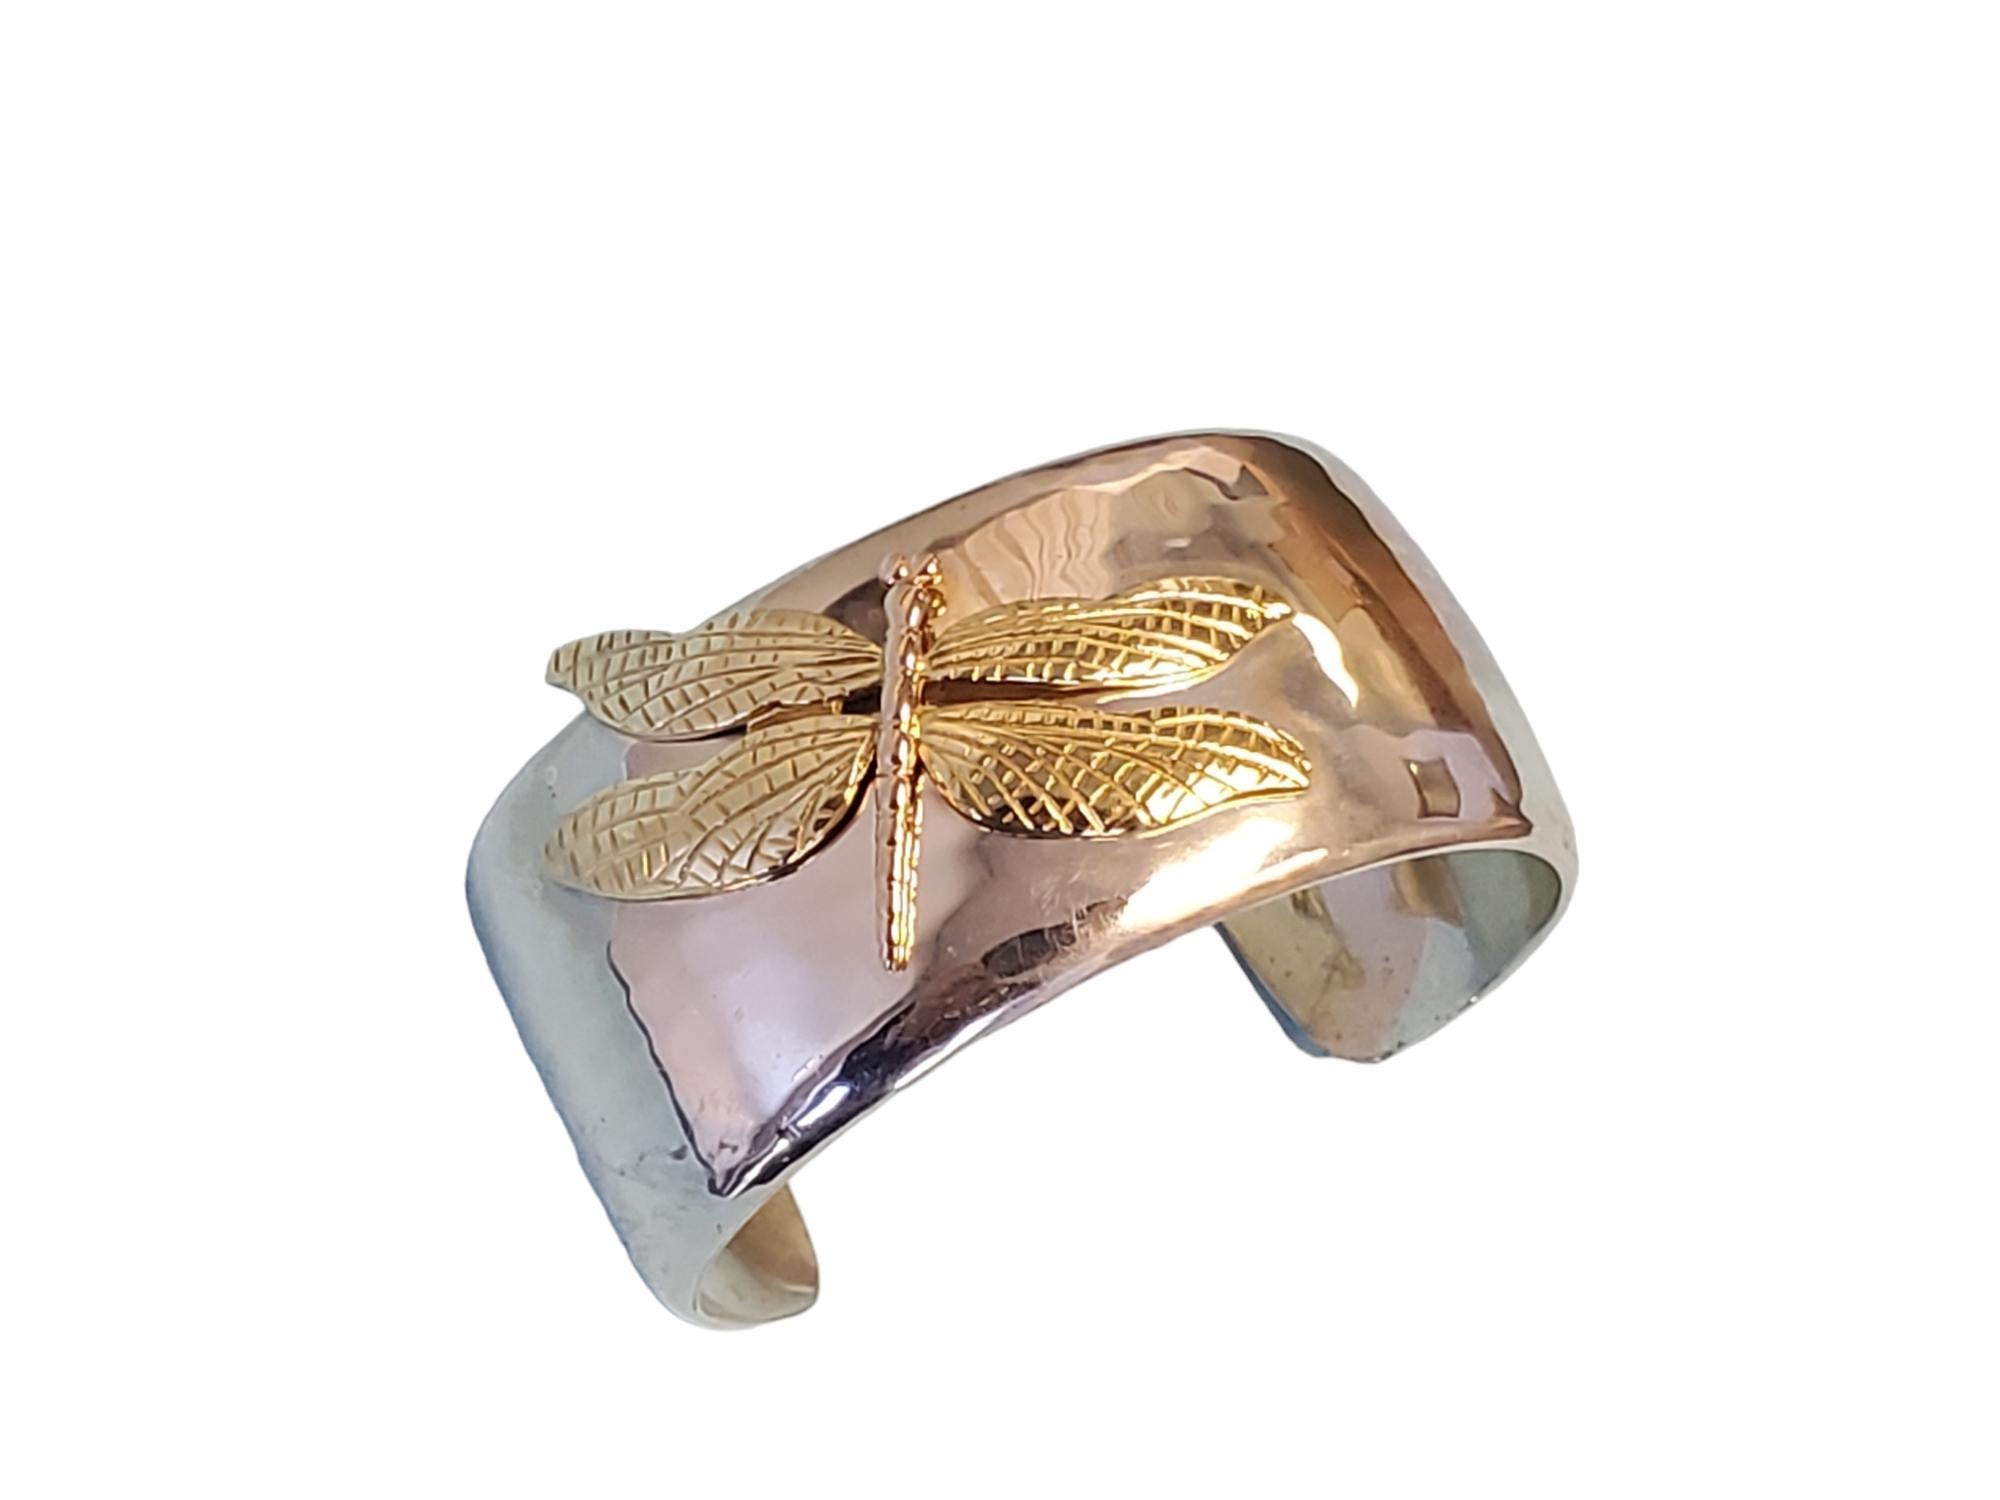 Vintage Tiffany & Co. Dragonfly Cuff Bracelet

Listed is a fantastic vintage Tiffany & Co. sterling and 18k tri-color cuff. This is a wide and wonderfully made cuff by Tiffany & Co.  The dragonfly done in 18k yellow and rose gold is the star of this